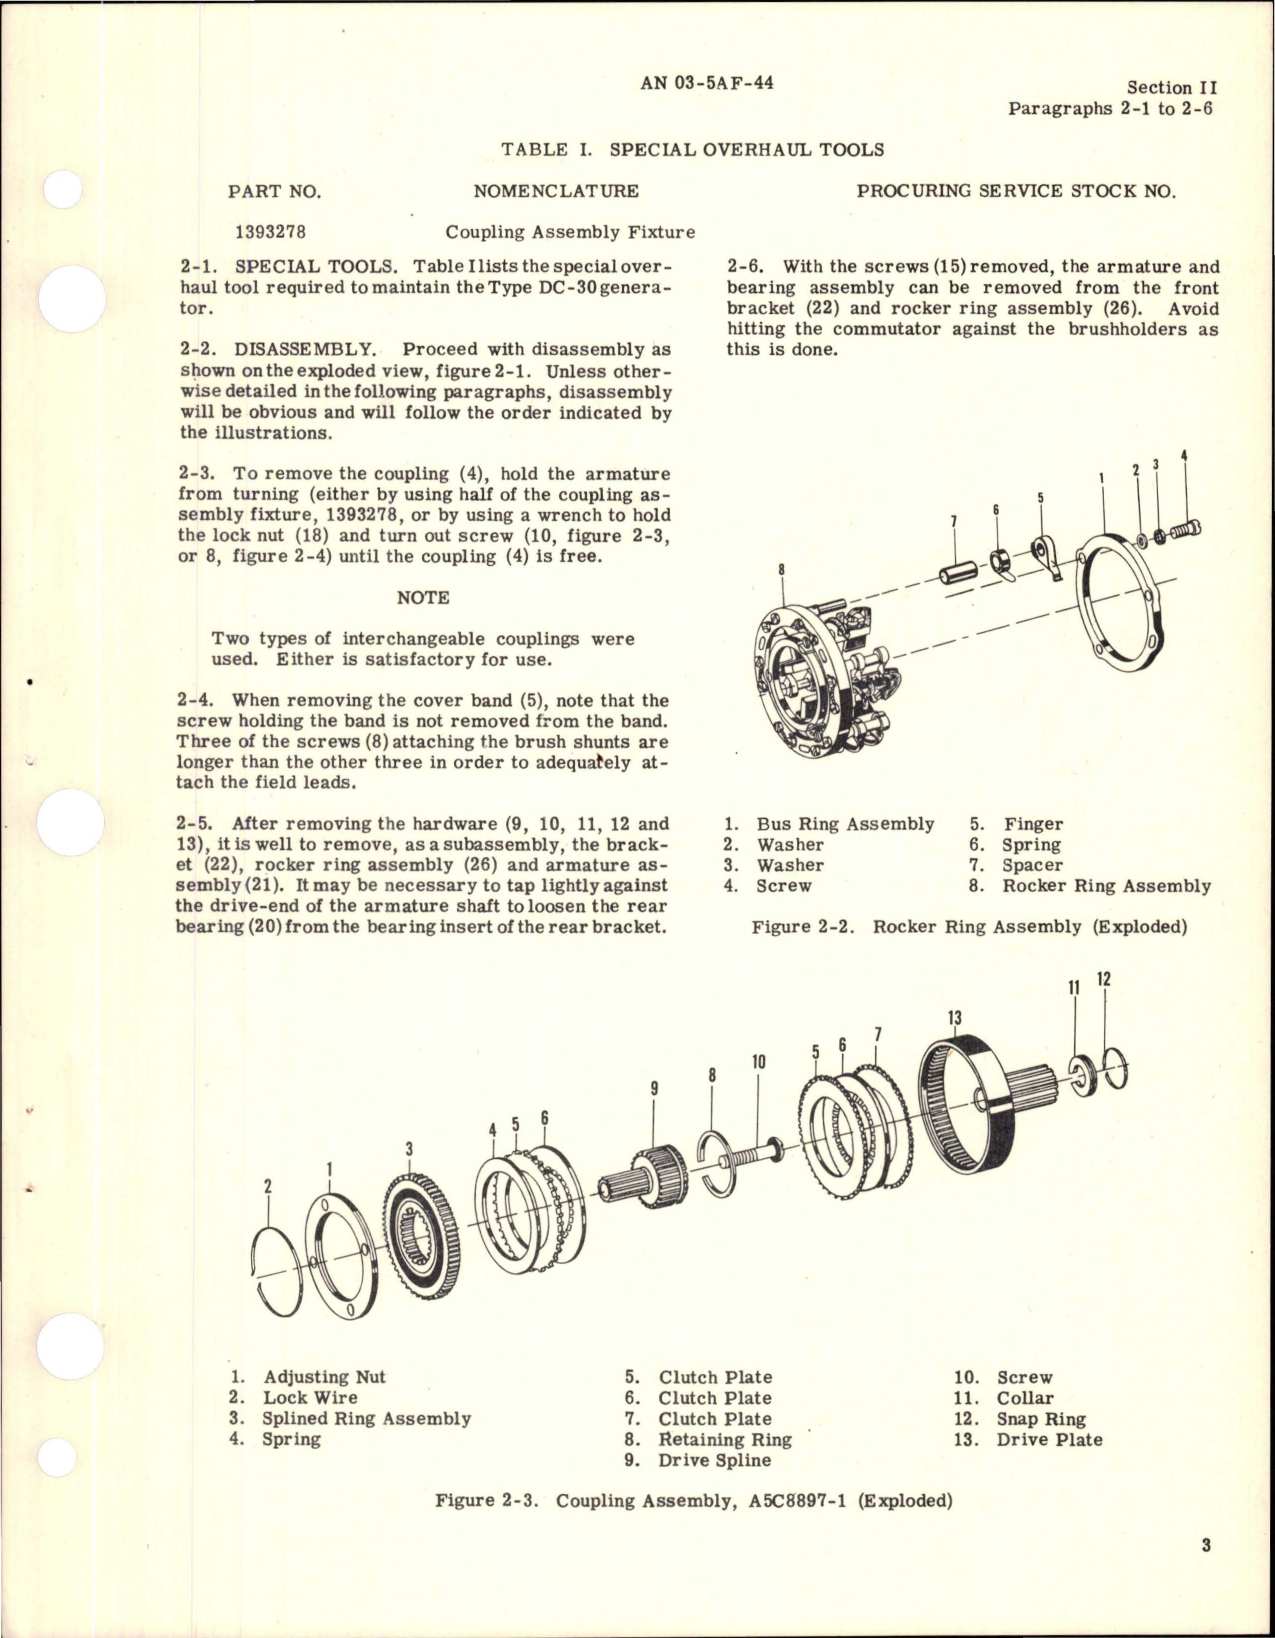 Sample page 5 from AirCorps Library document: Overhaul Instructions for DC-30 Generator - Part A19A6161